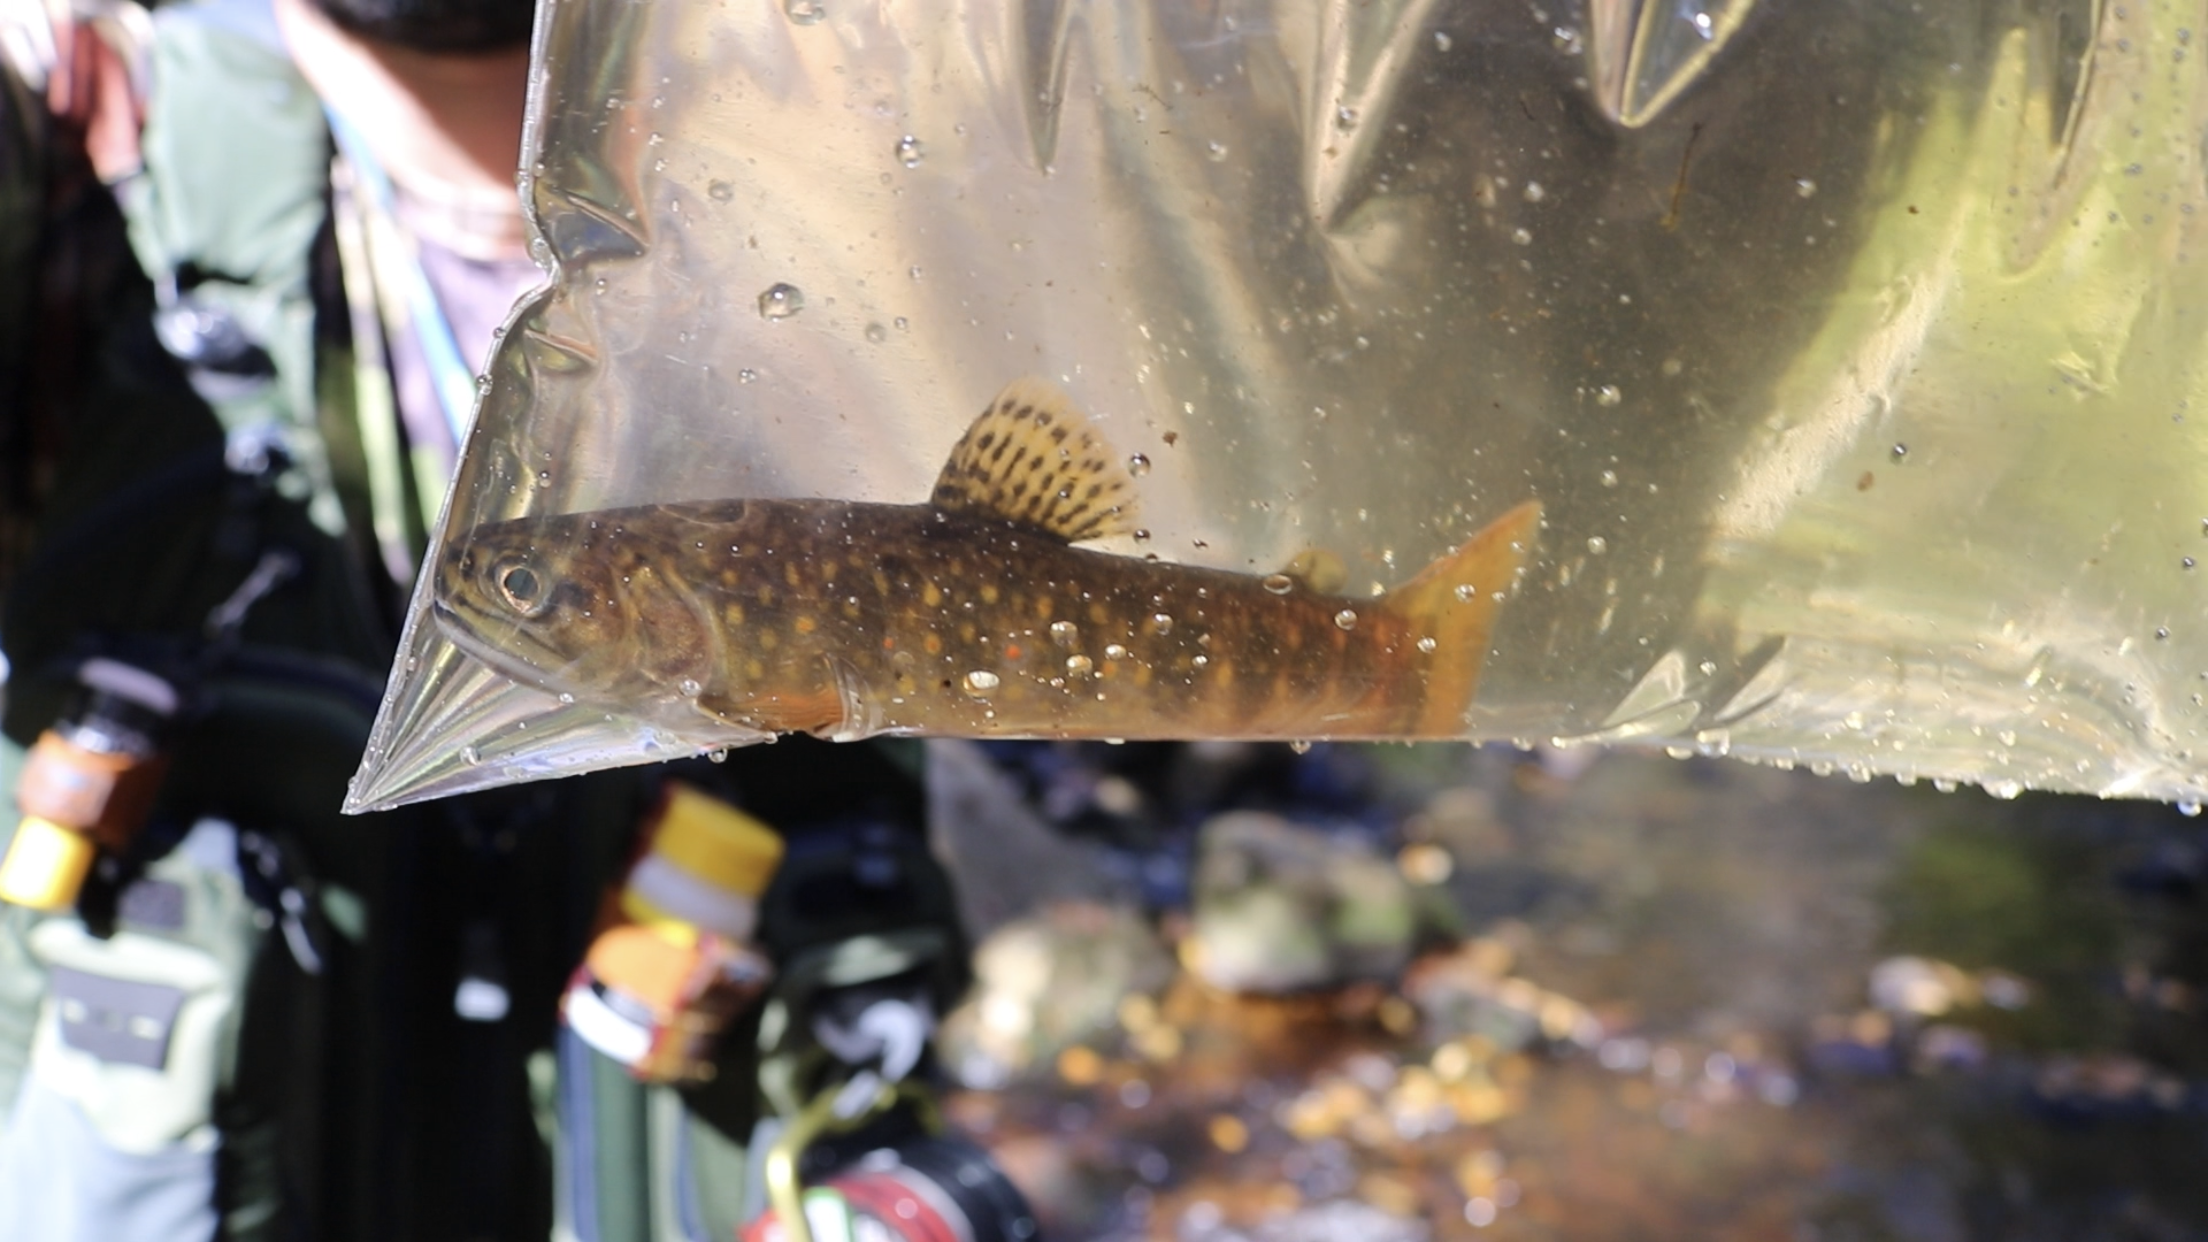 The brook trout were returned to the wild after fin sampling